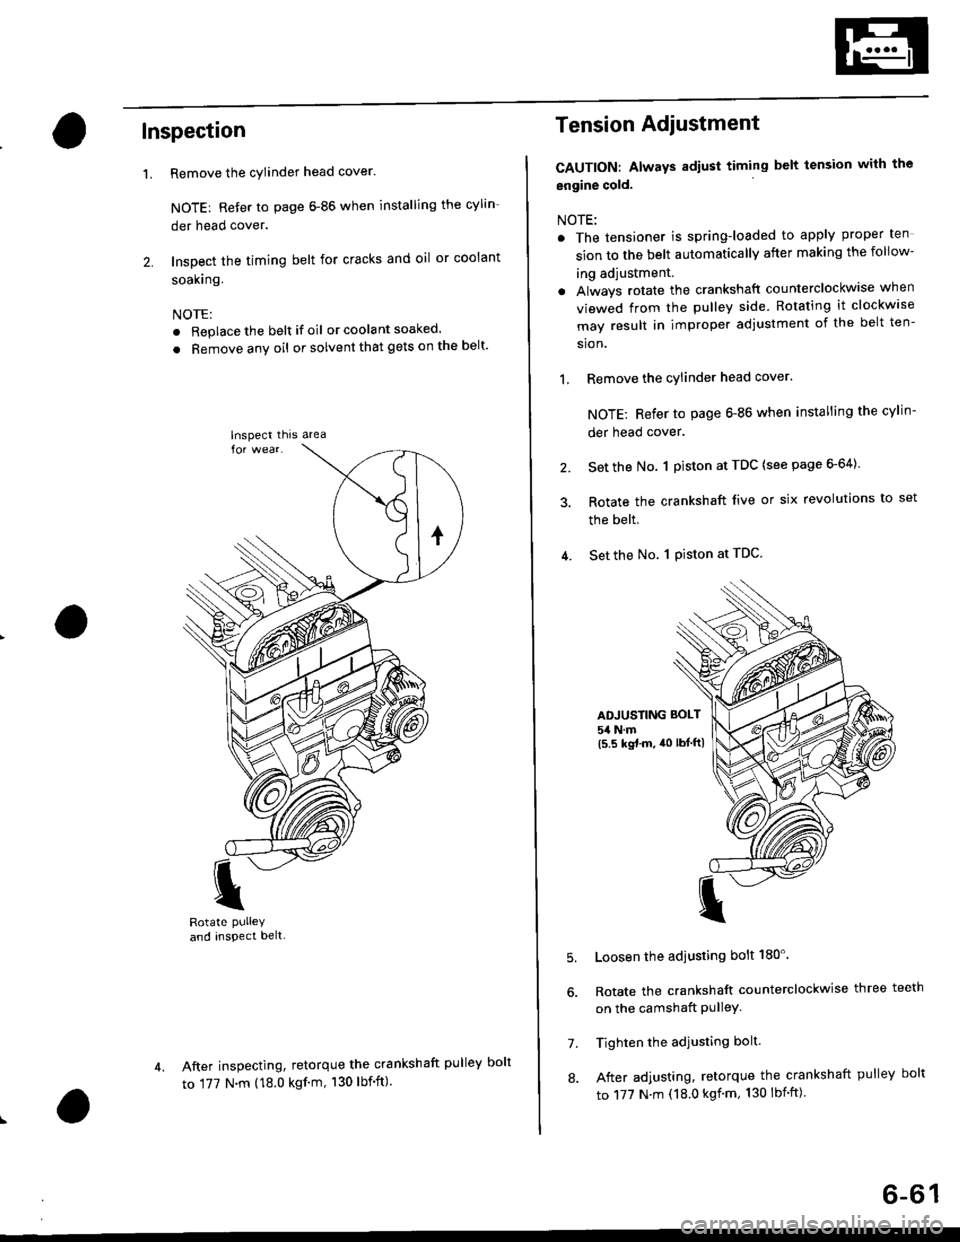 HONDA CIVIC 1999 6.G Workshop Manual Inspection
Remove the cylinder head cover.
NOTE: Refer to page 6-86 when installing the cylin-
der head cover.
Inspect the timing belt for cracks and oil or coolant
soakrng.
NOTE:
. Replace the belt i